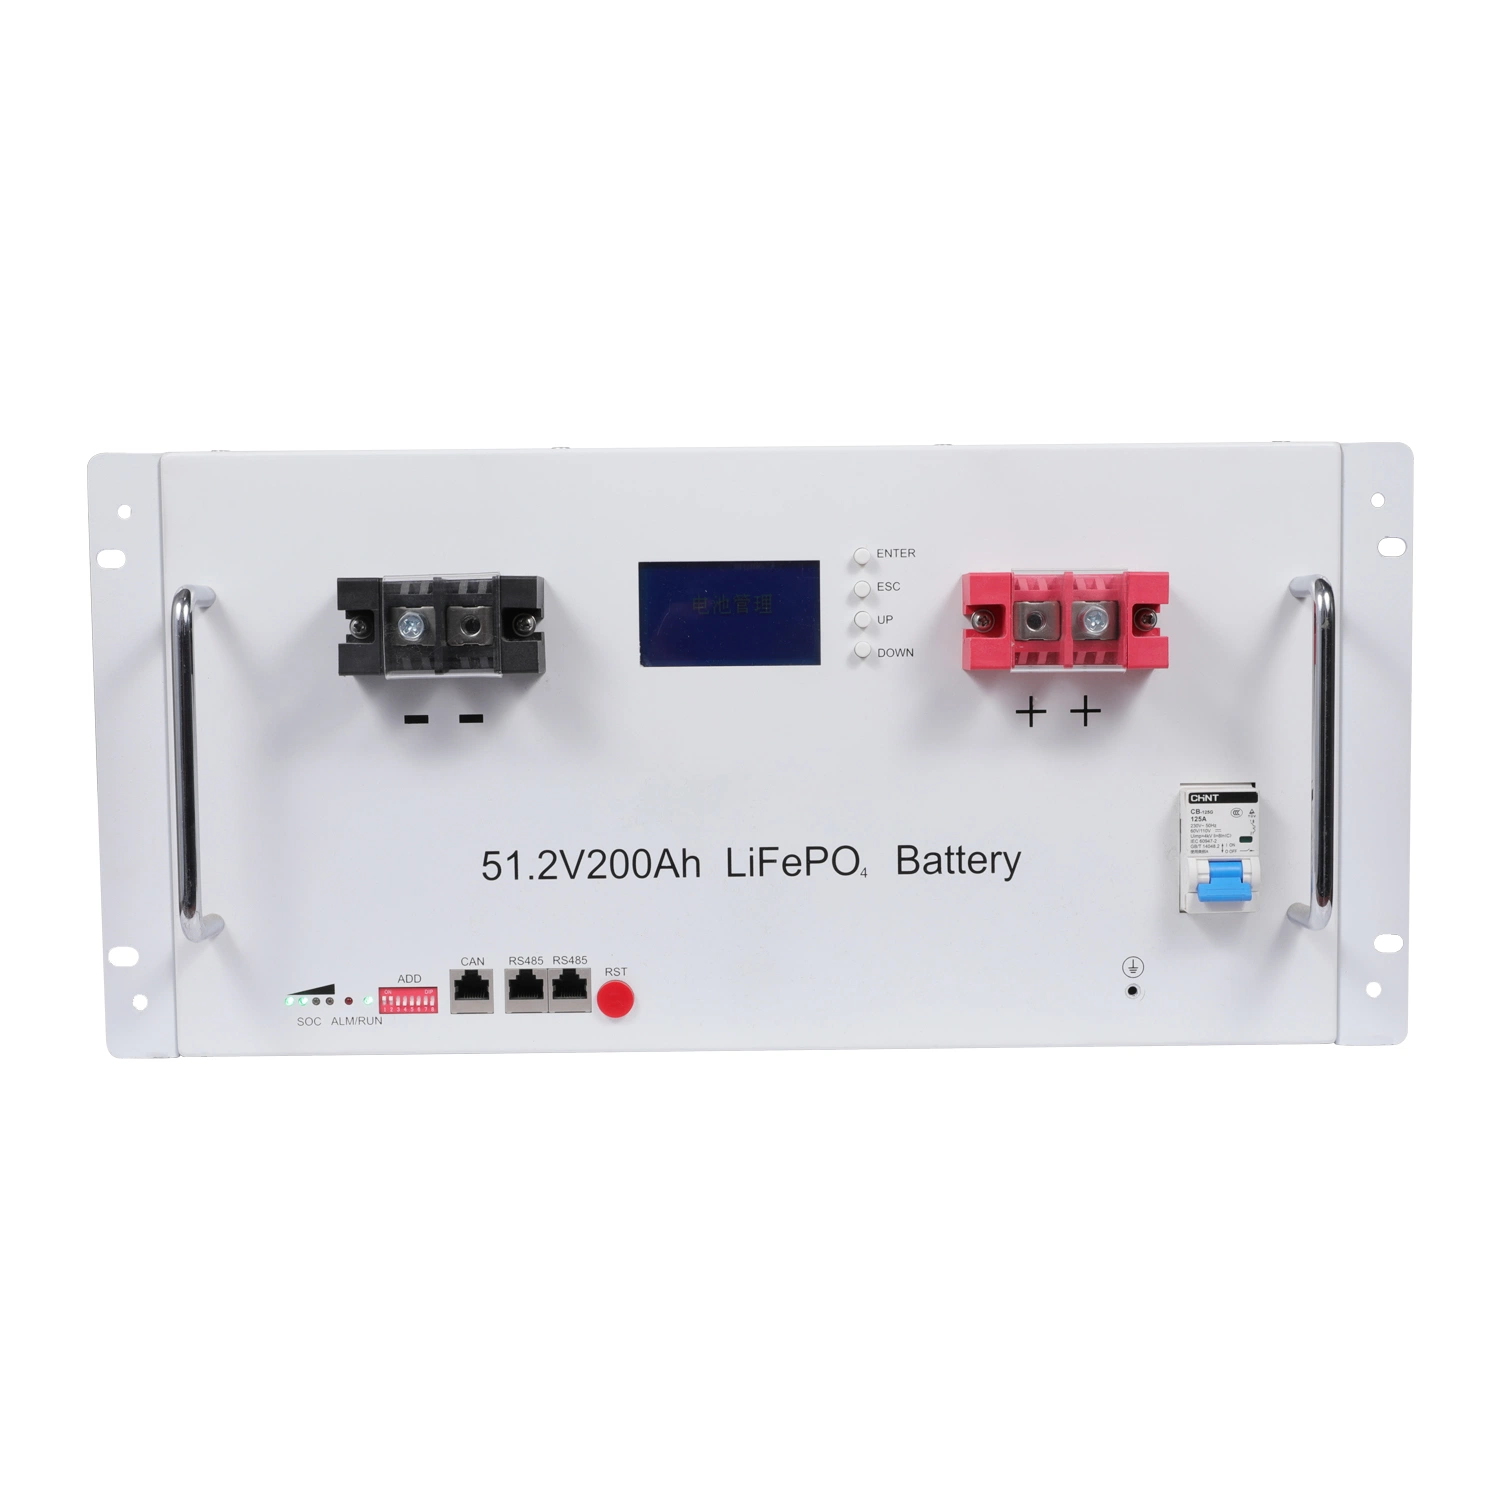 51.2V 200ah Deep Cycle Lithium Iron Phosphate Battery Rack-Mounted Battery for Telecommunication for UPS